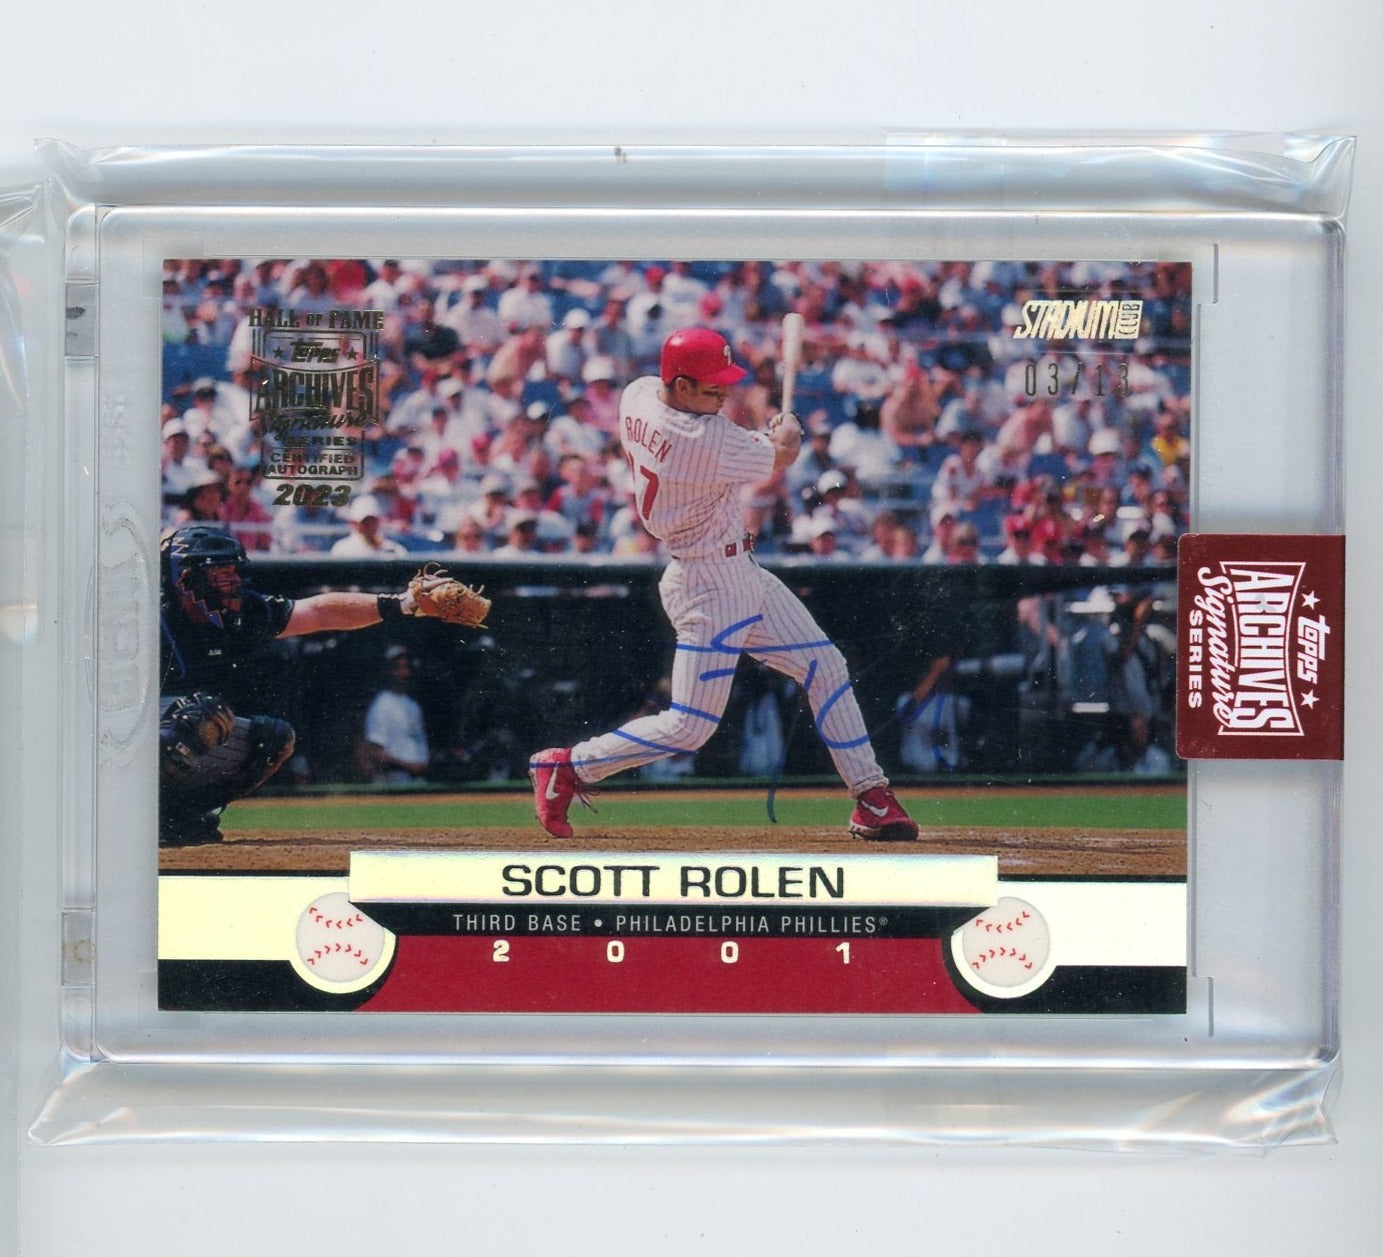 Scott Rolen 2023 Topps Archives Signature 2000 Topps Stadium Club auto –  Piece Of The Game